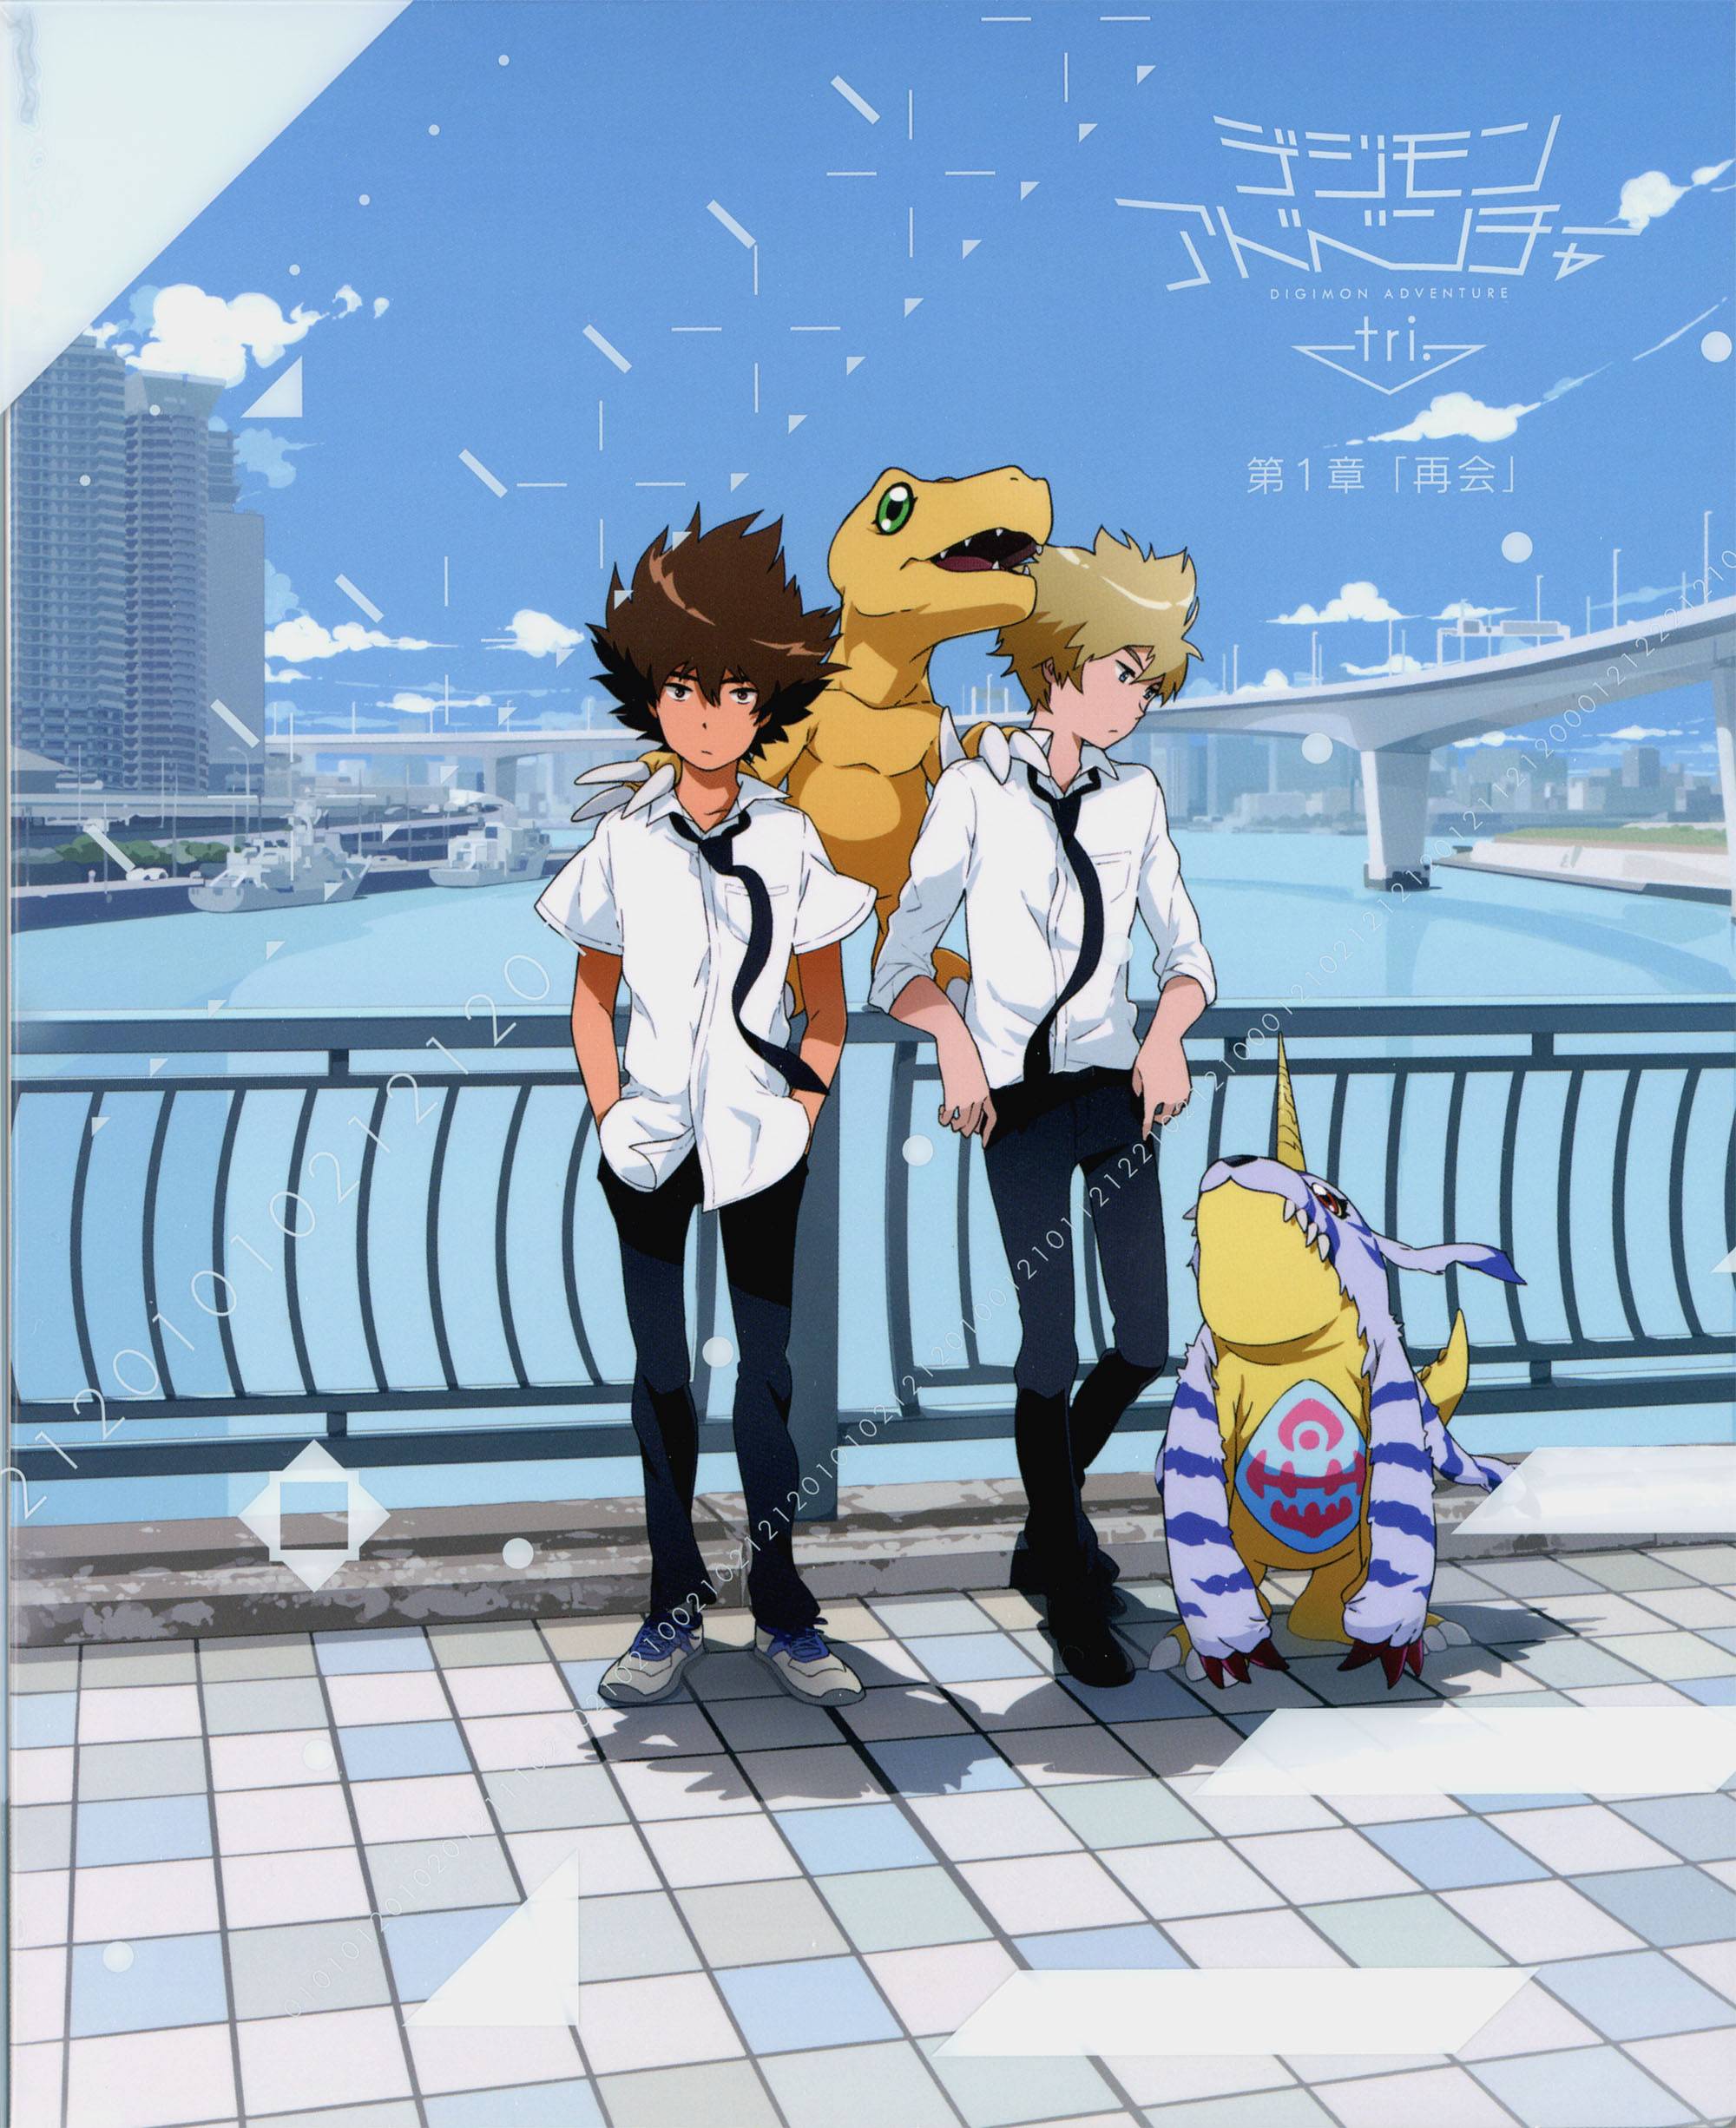 Digimon Adventure Tri Chapter 2: Ketsui extend theatrical release